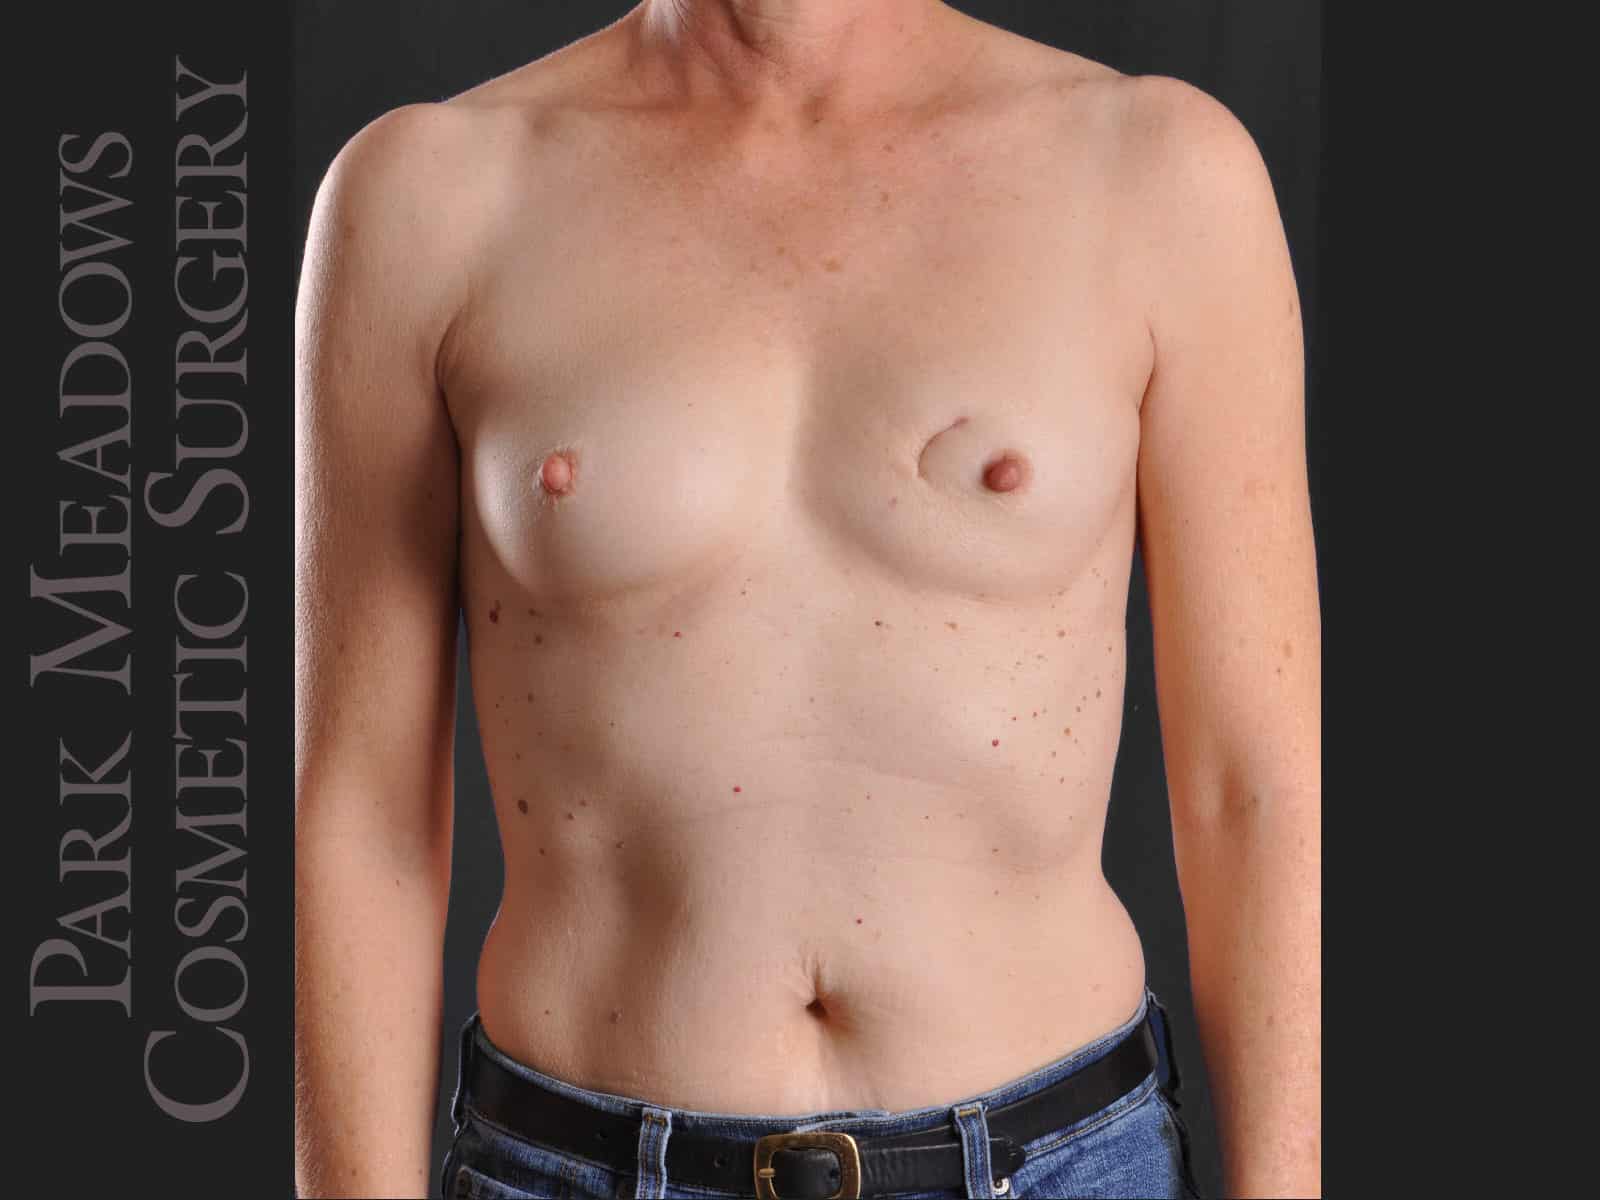 Bilateral mastectomy with tissue expanders; silicone implant exchange; two separate fat grafting sessions; nipple reconstruction and areola pigmentation